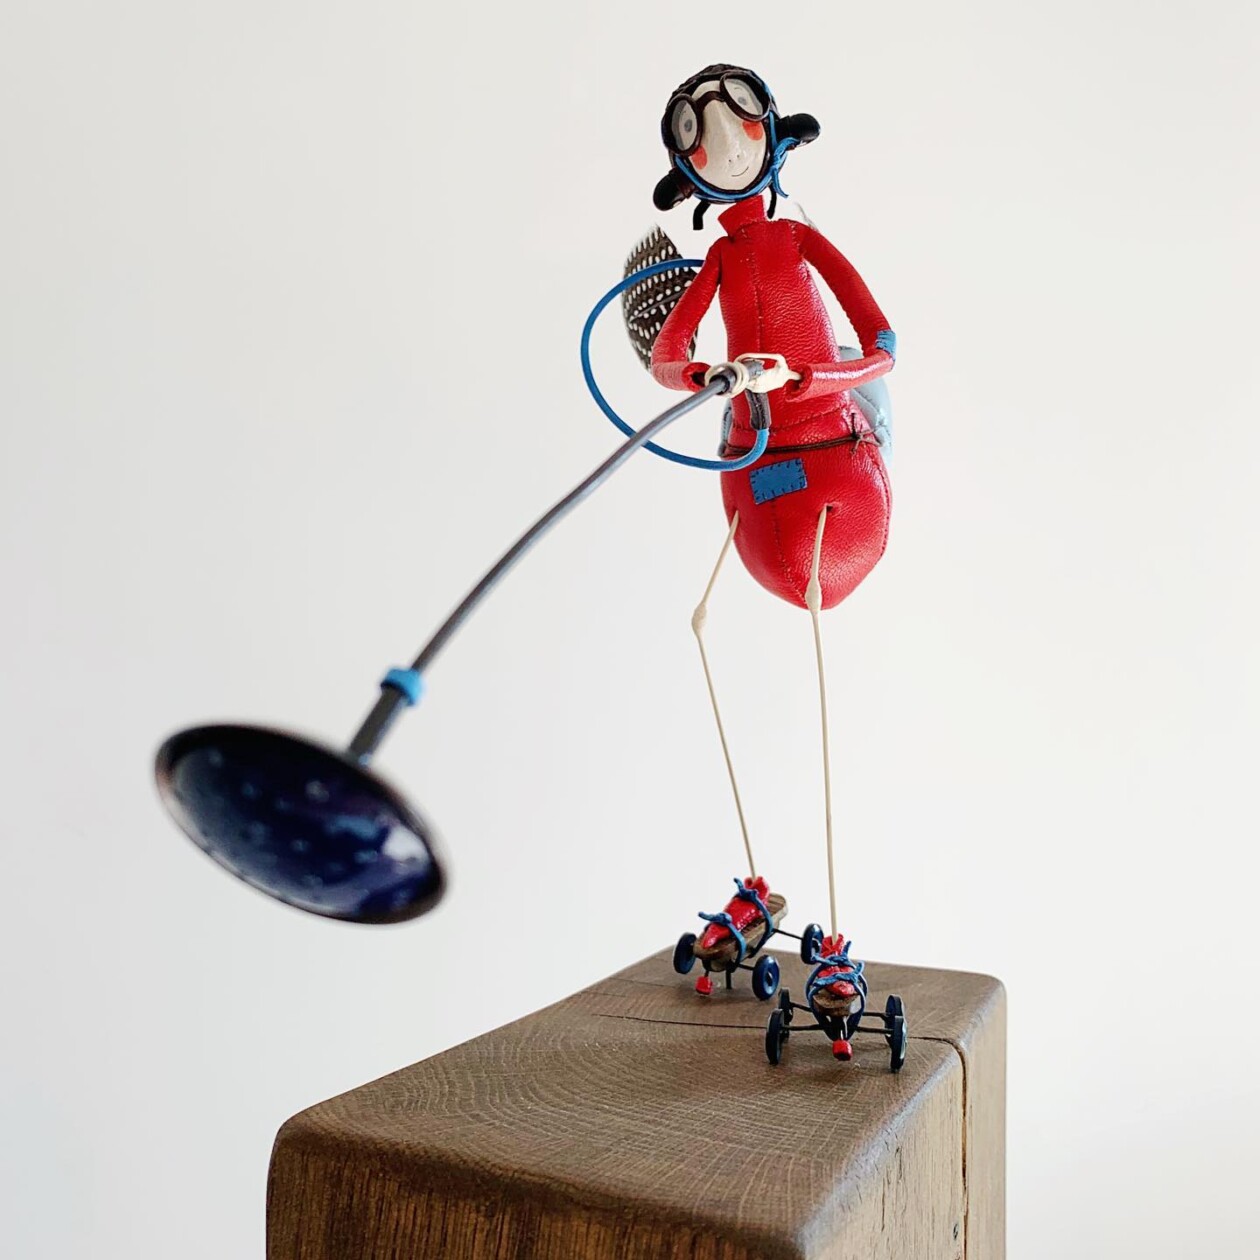 The Quirky And Amusing Fairy Lady Sculptures Of Samantha Bryan (10)